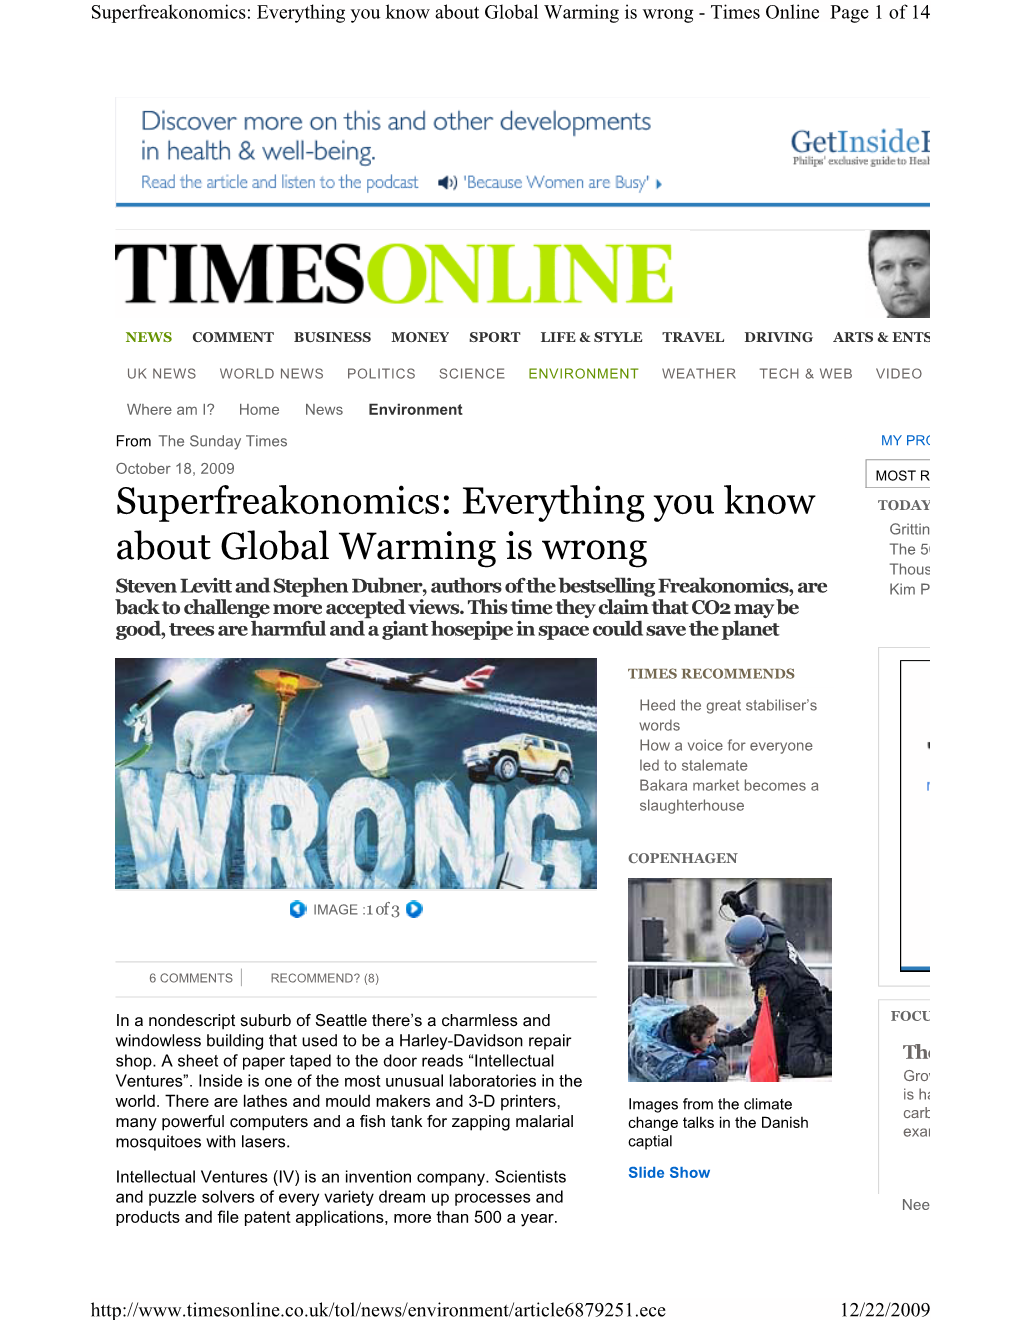 Superfreakonomics: Everything You Know About Global Warming Is Wrong - Times Online Page 1 of 14